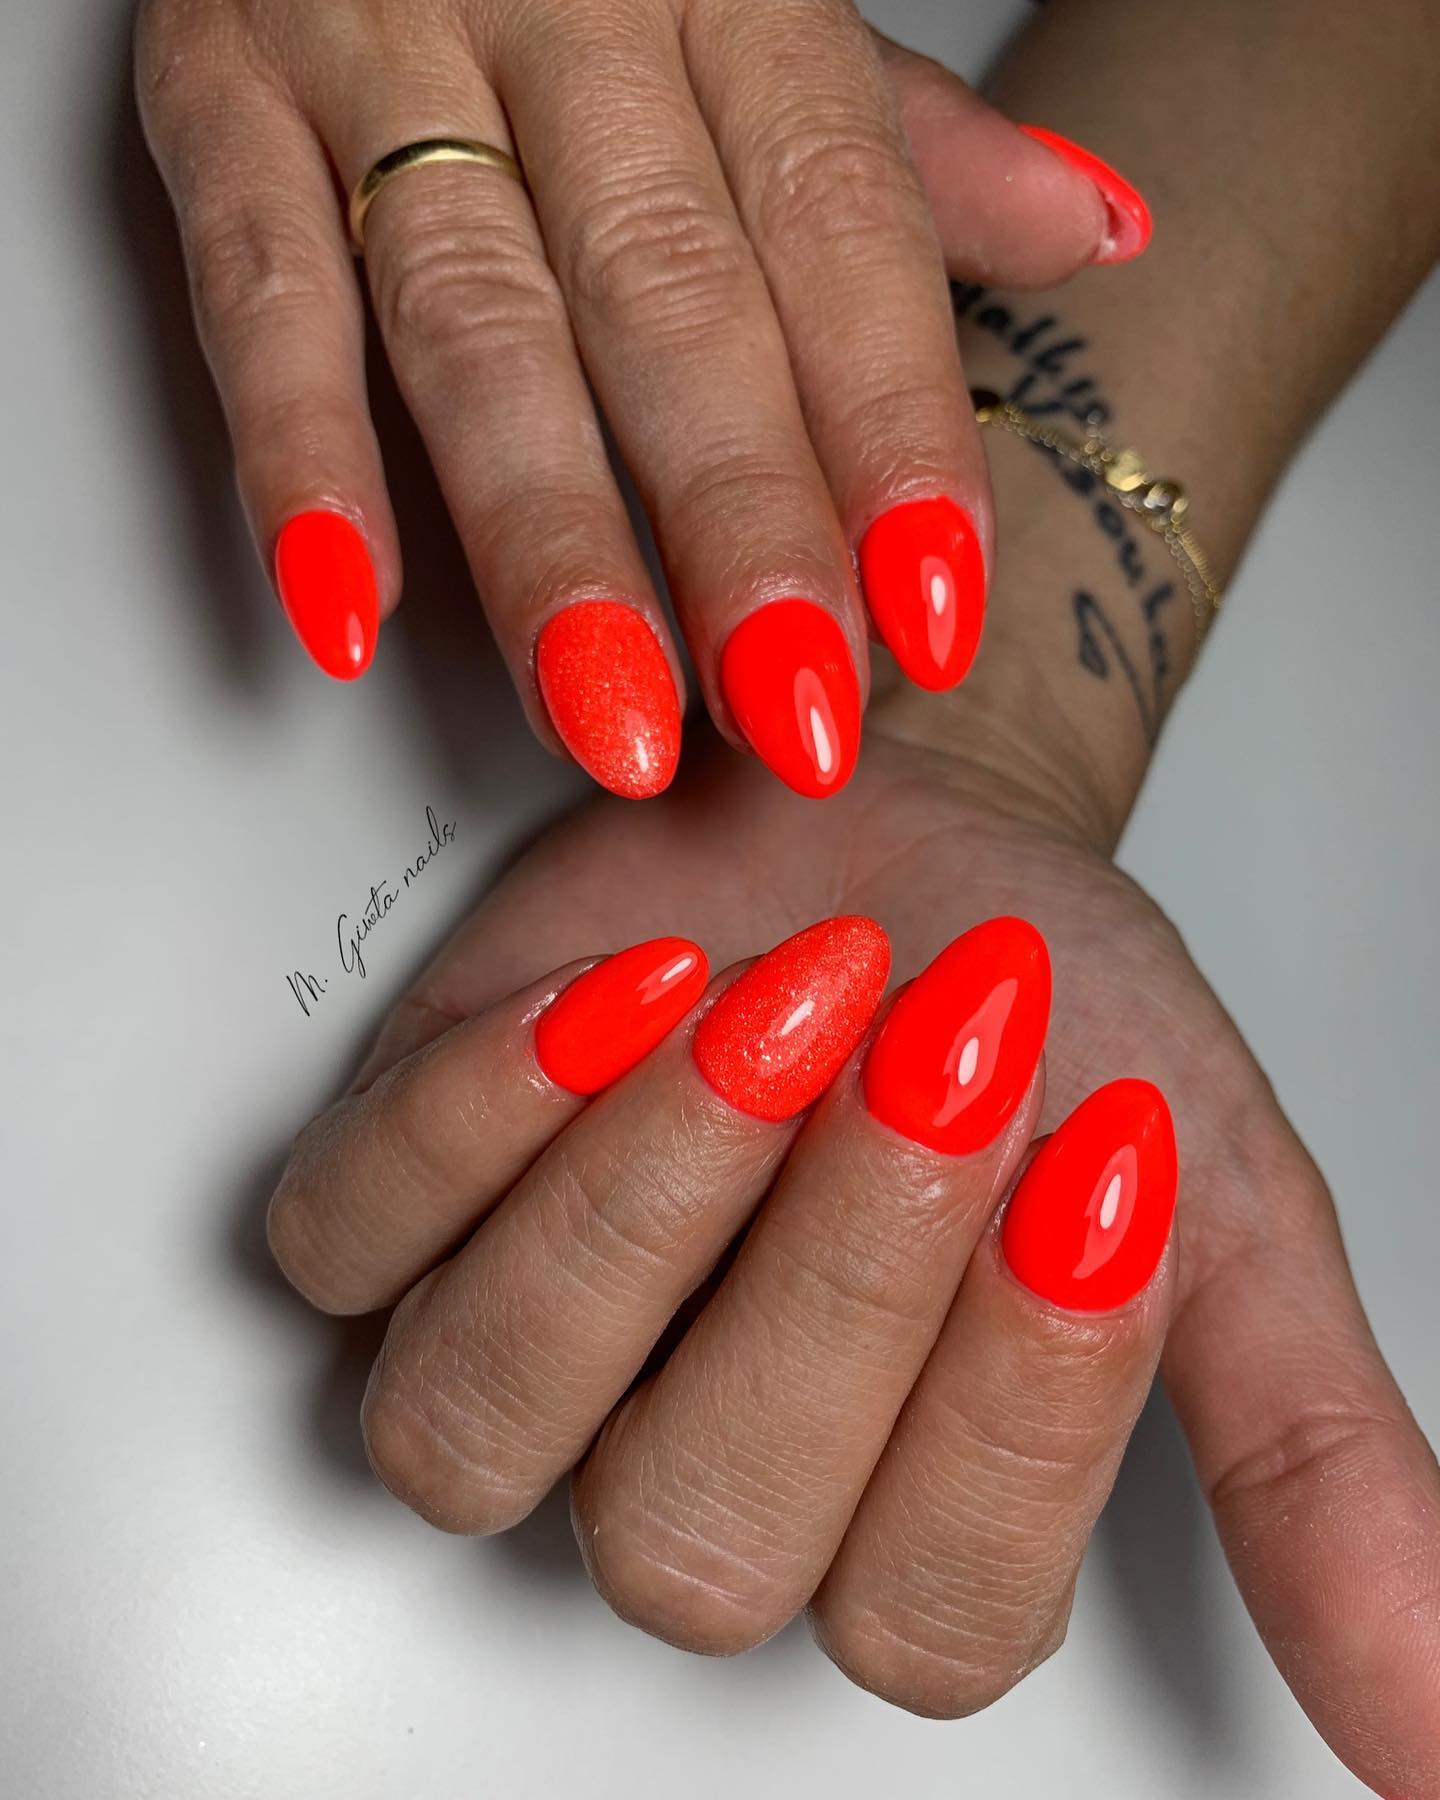  For those who can't give up having almond nails get ready to shine. Neon orange color when combined with almond nails will be fabulous.